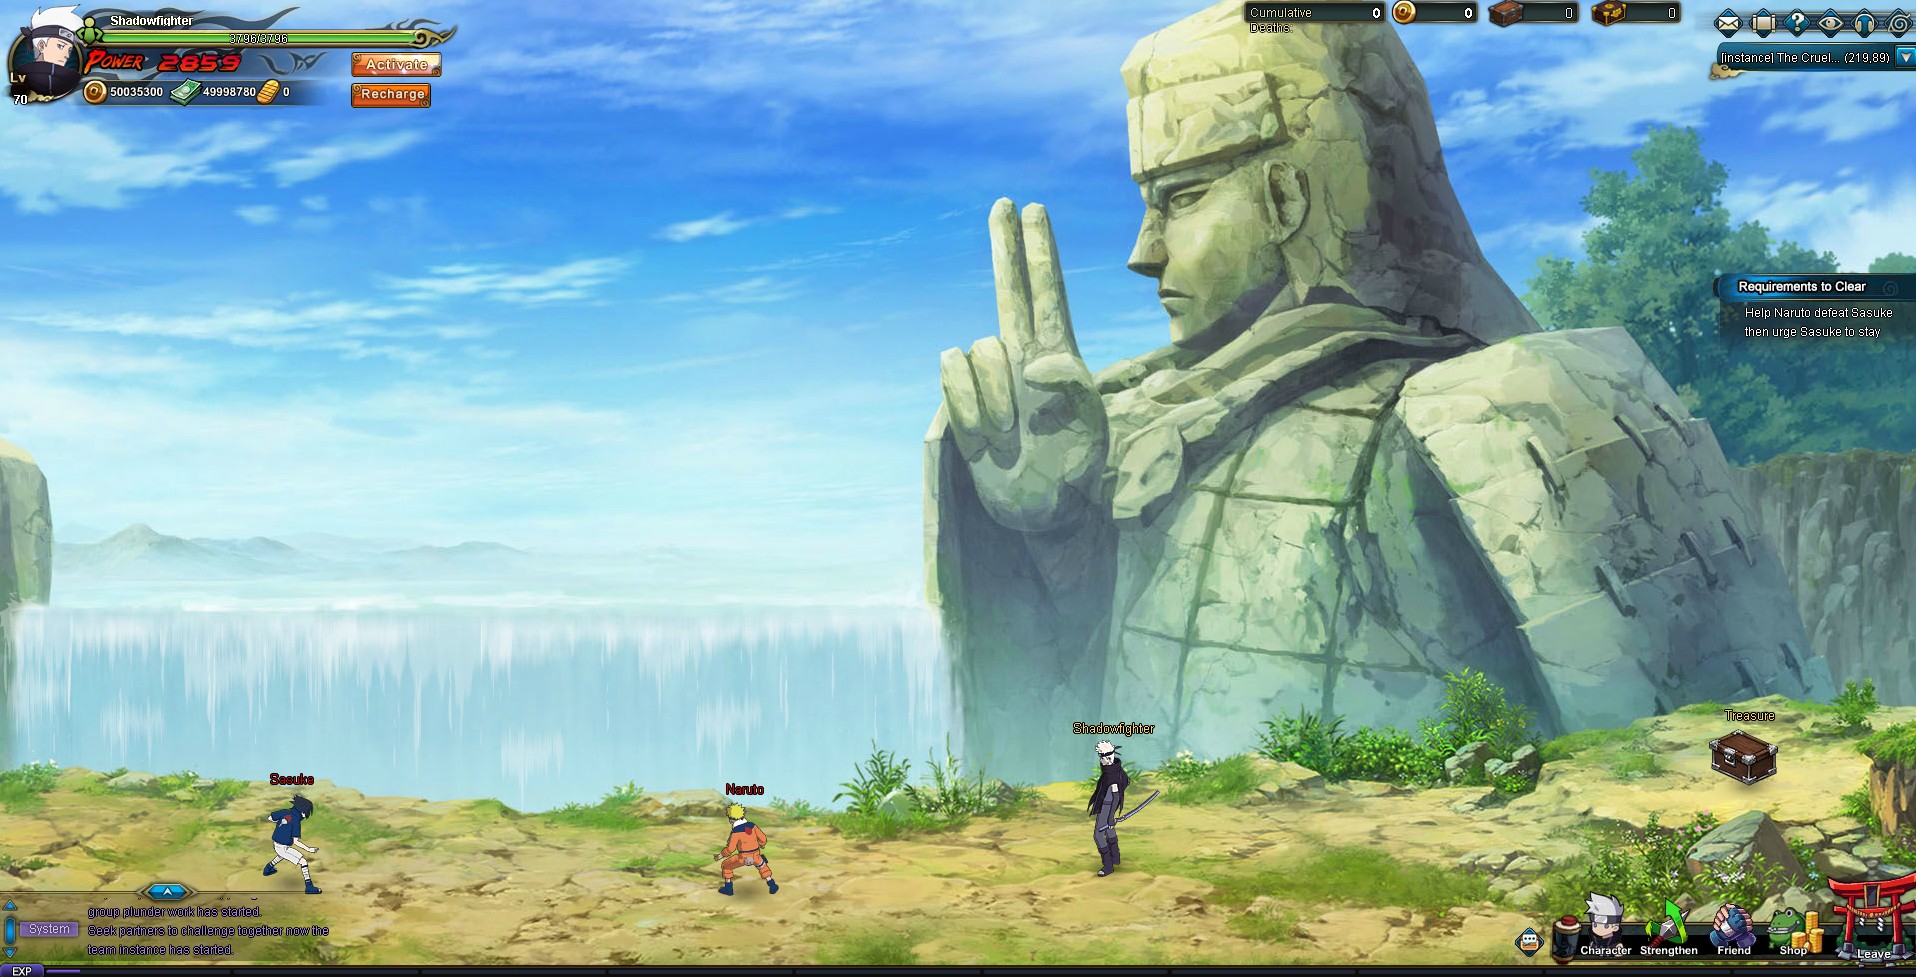 Naruto Online Officially Releasing in the West For PC - GameSpot